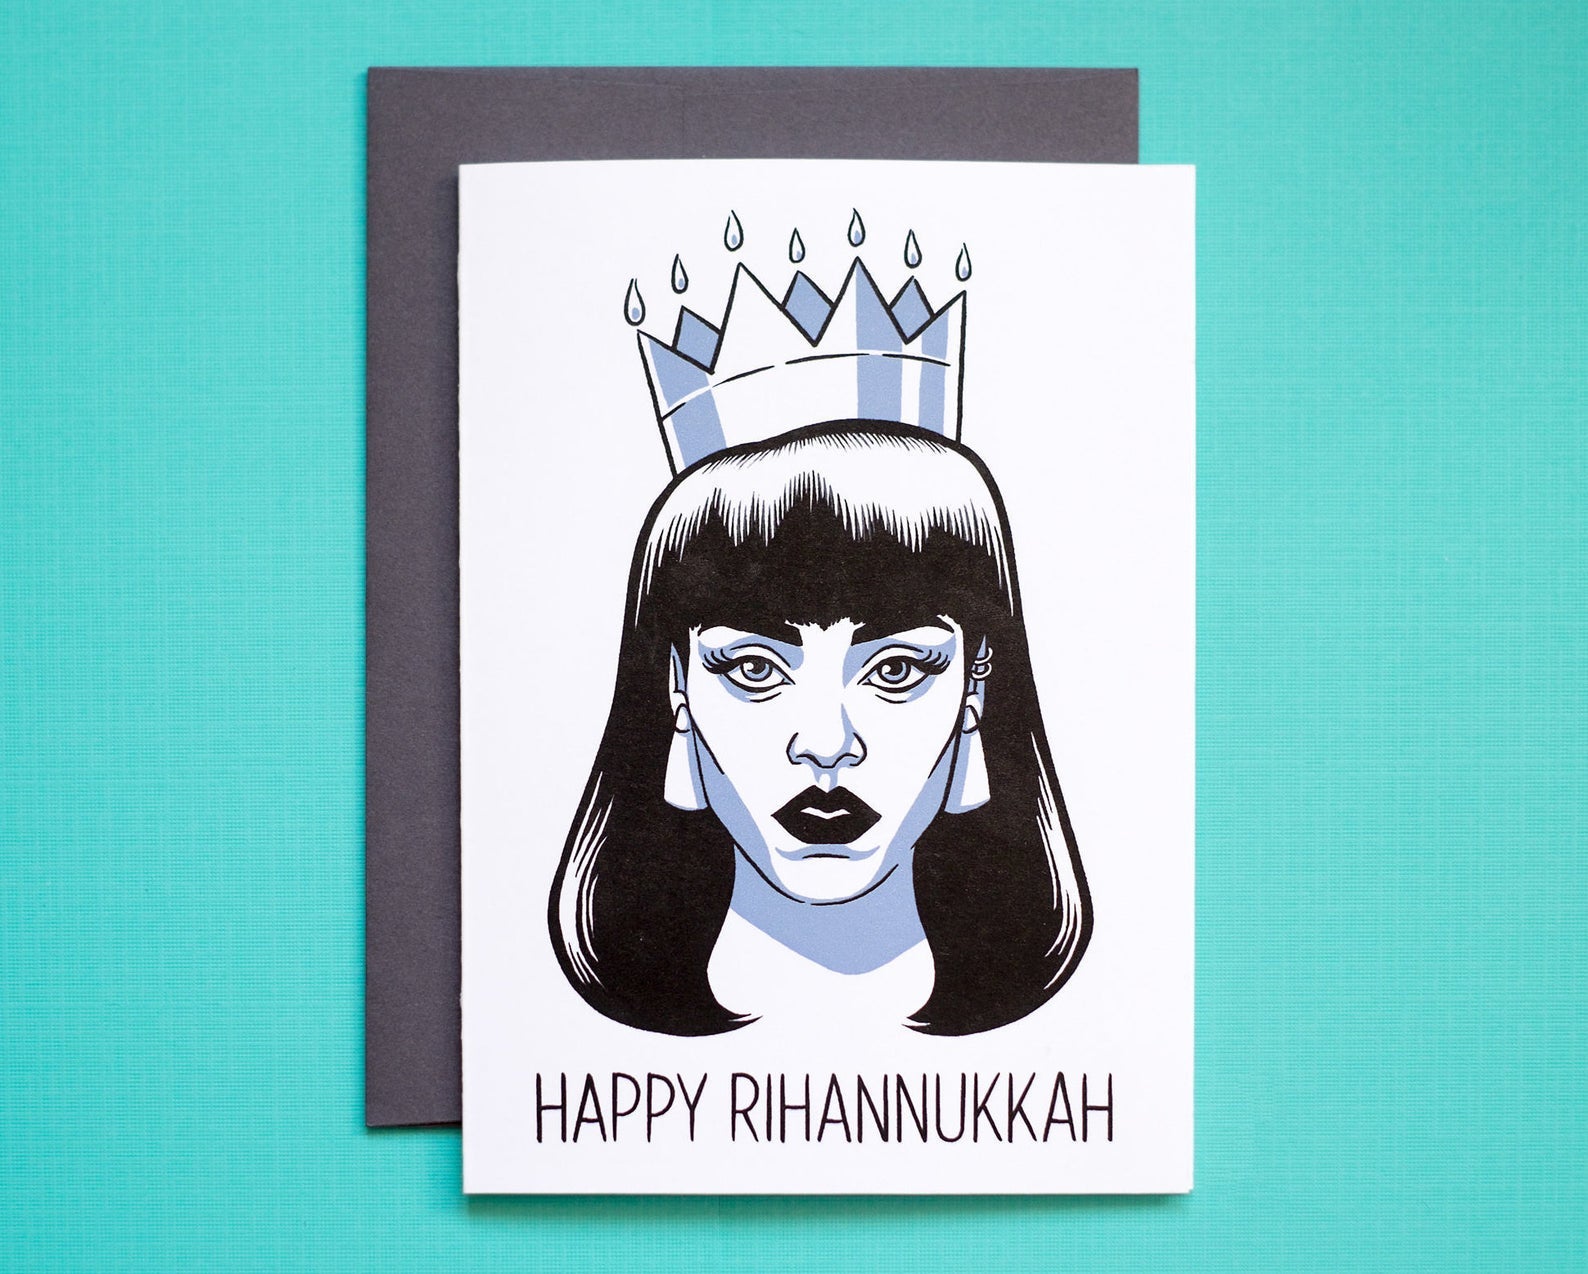 These Are The Black Greeting Cards You’ve Been Looking For